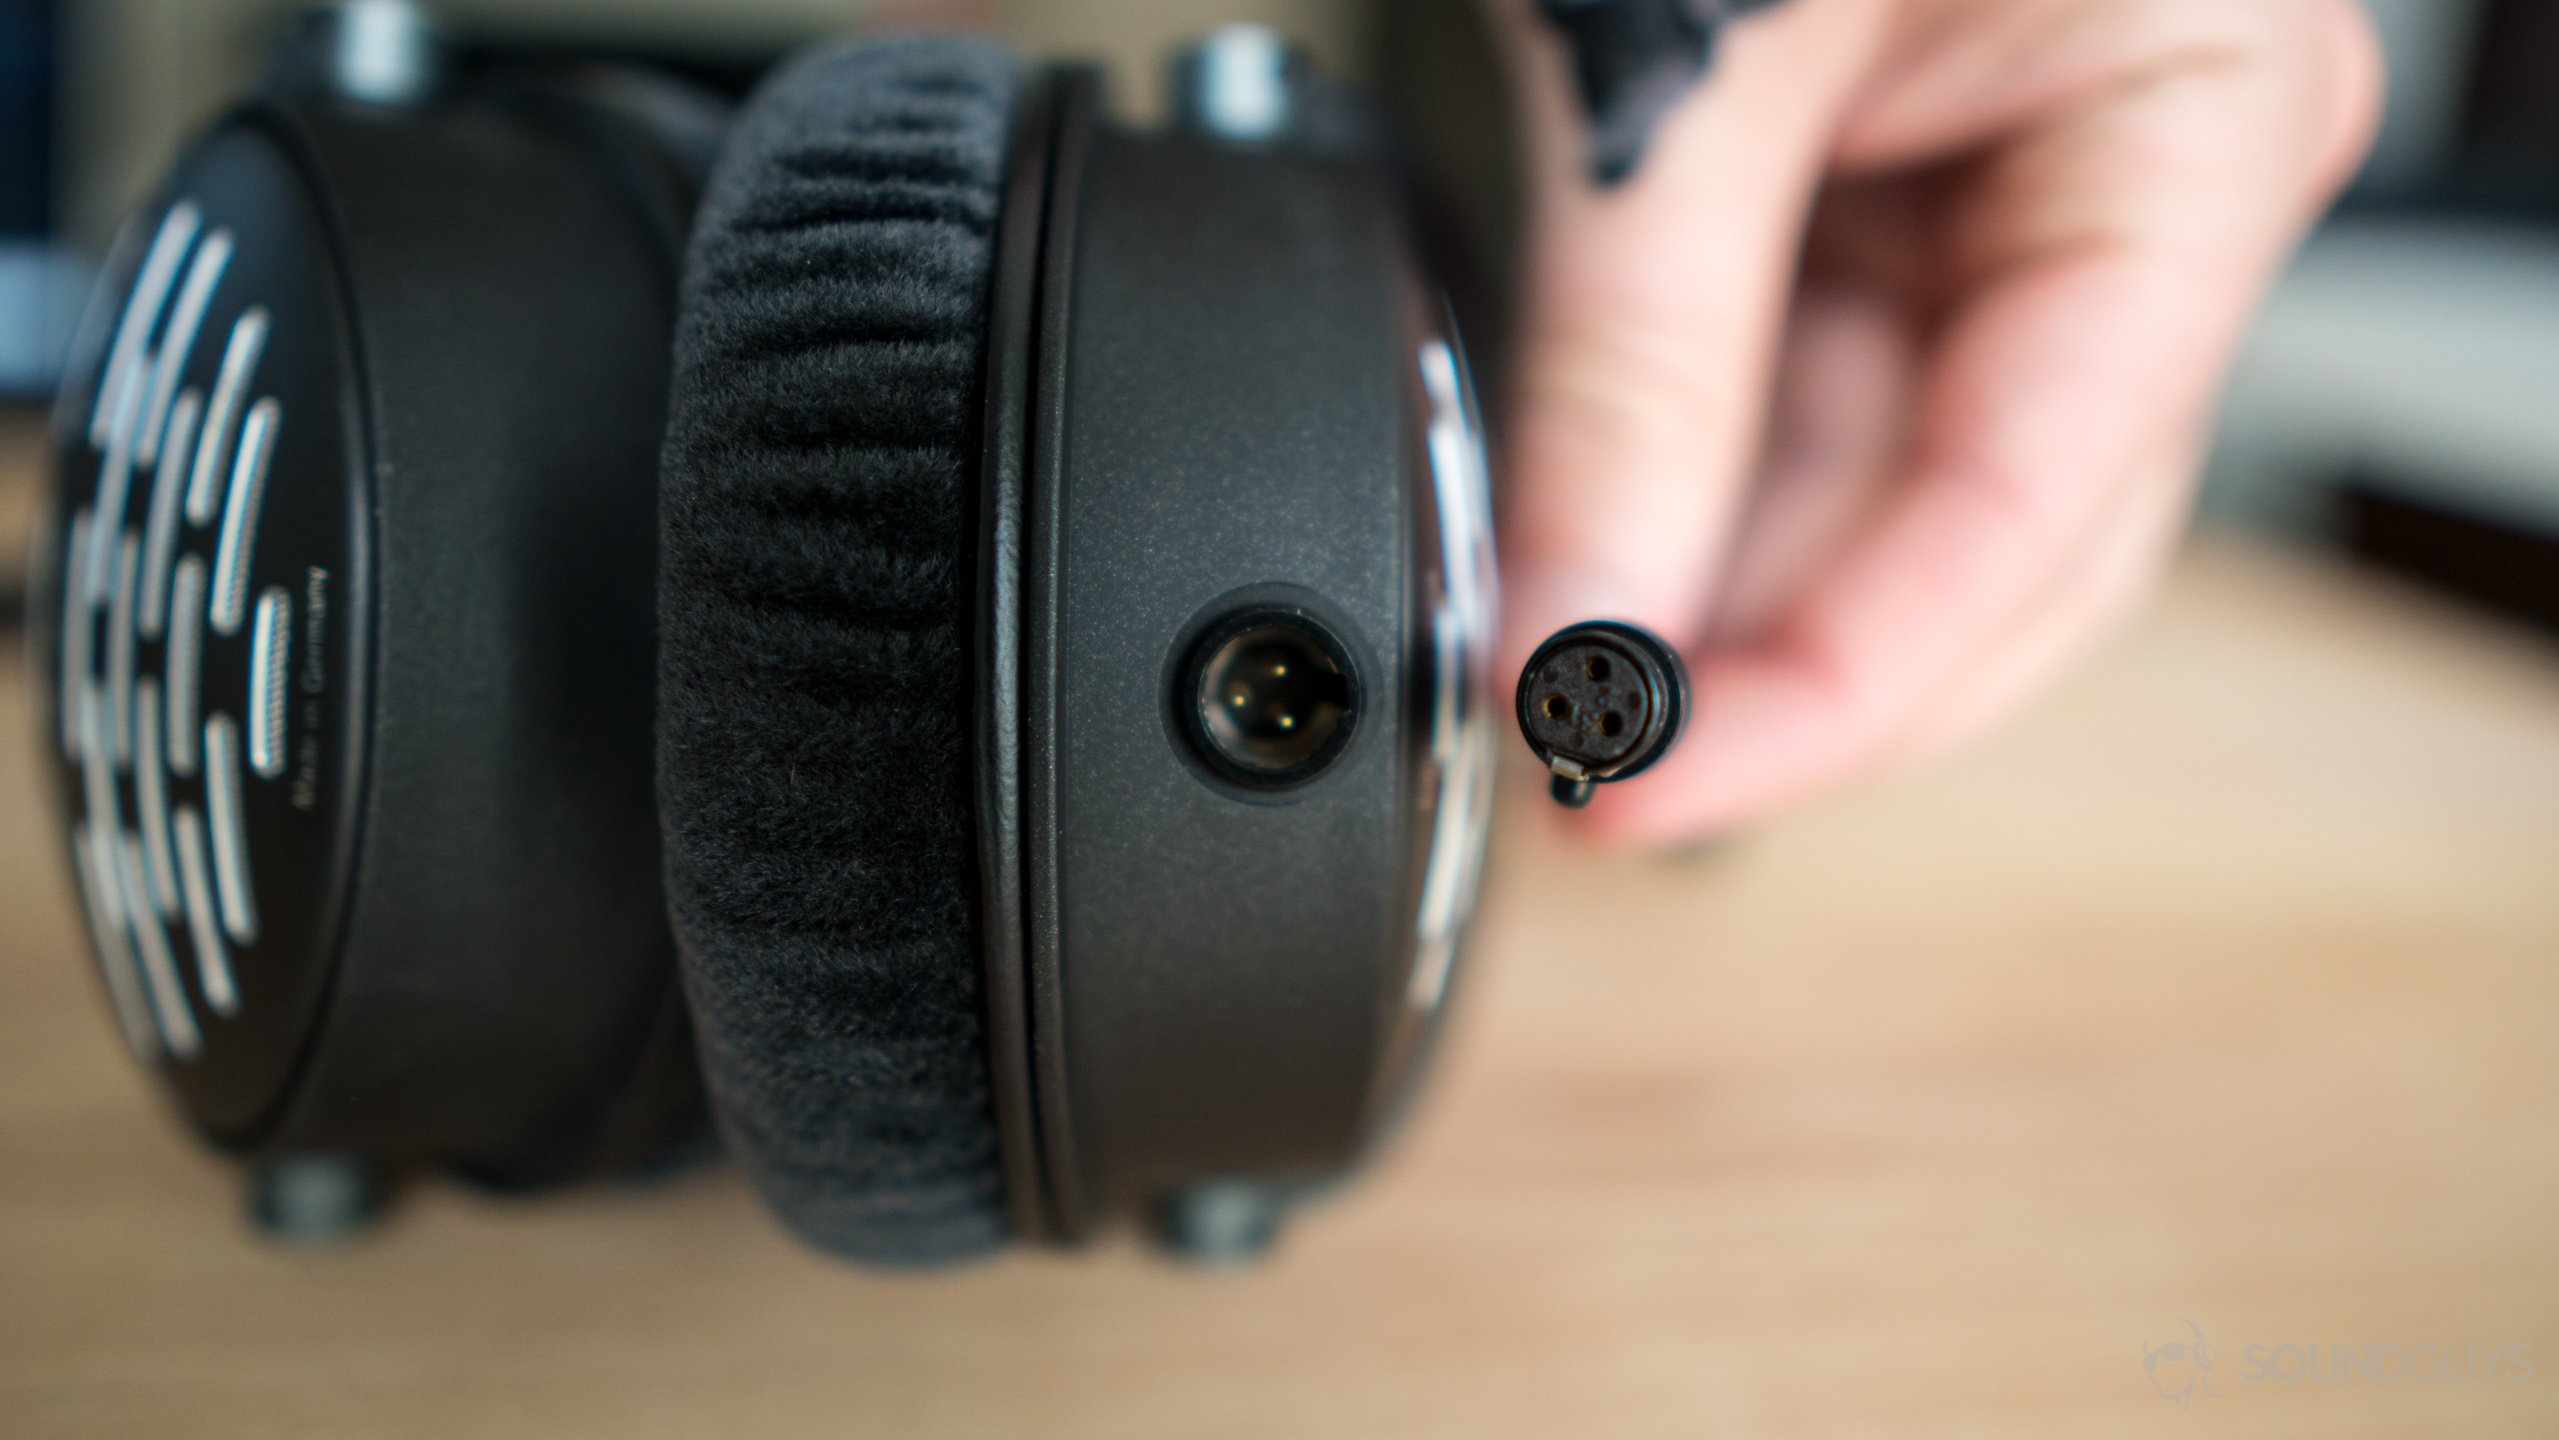 The 3-pin mini XLR cable plug into the left ear cup.